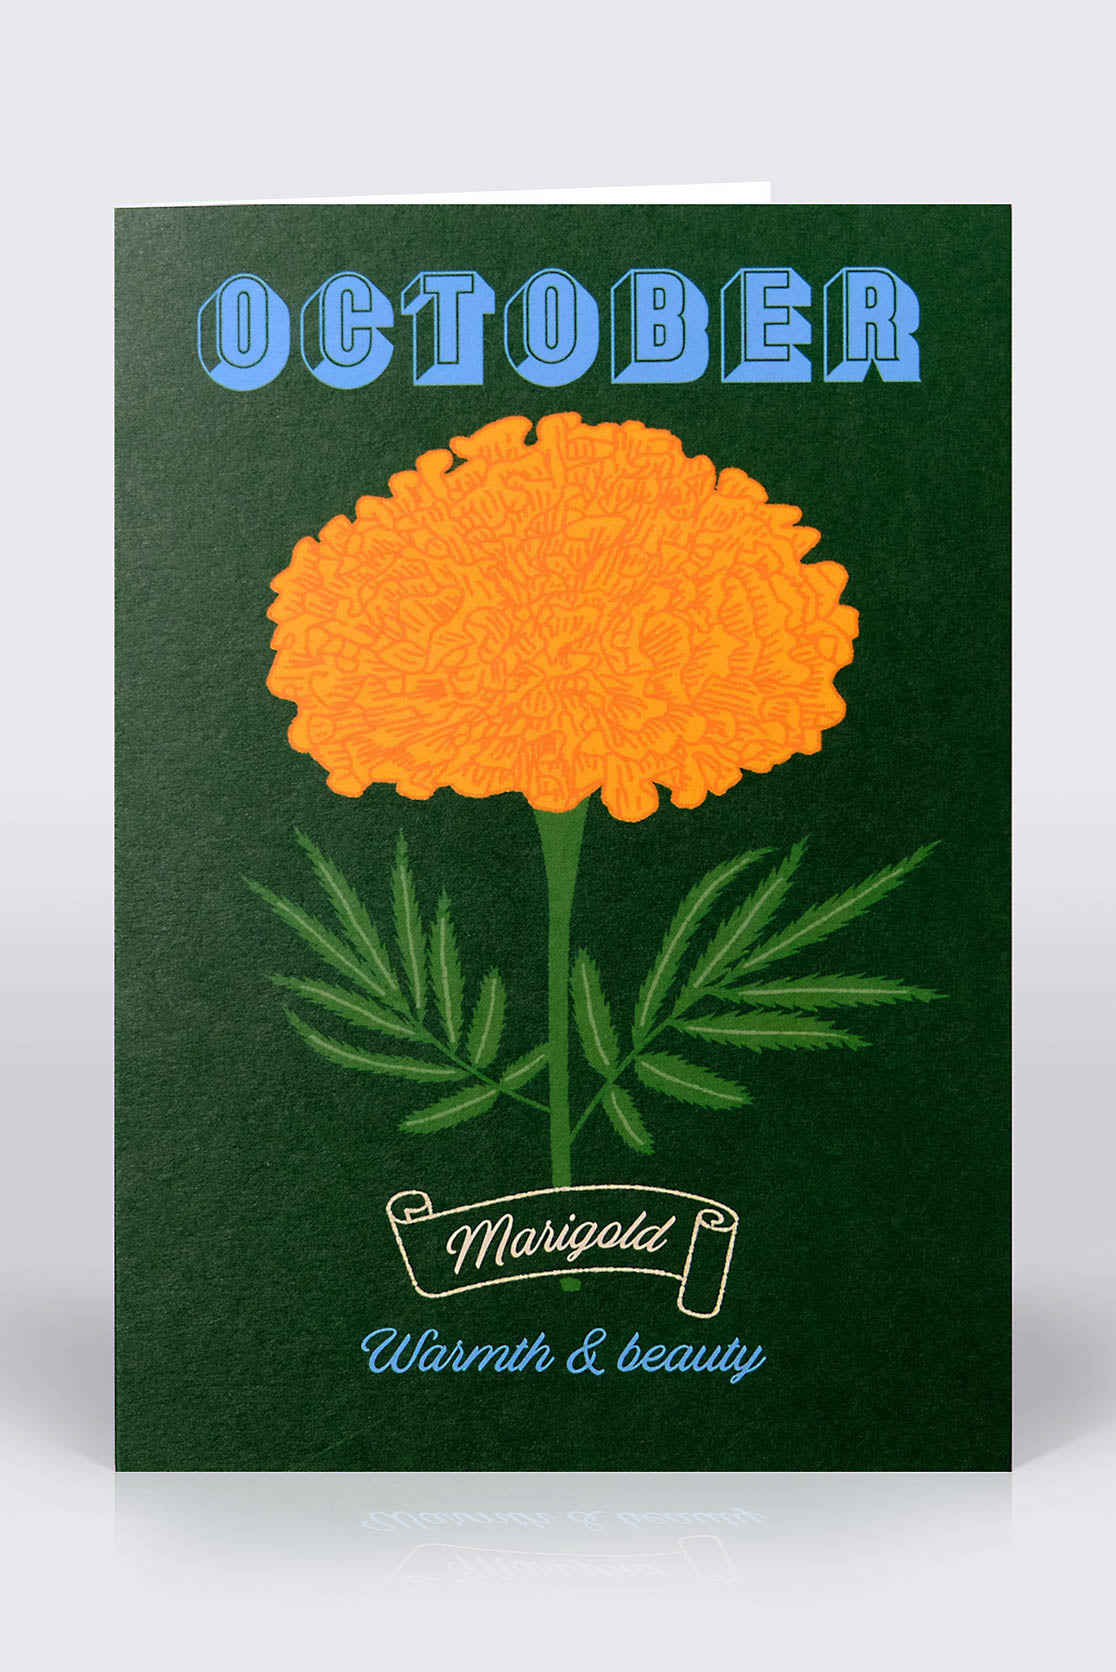 Dark green birthday card with bold October lettering and yellow marigold flower